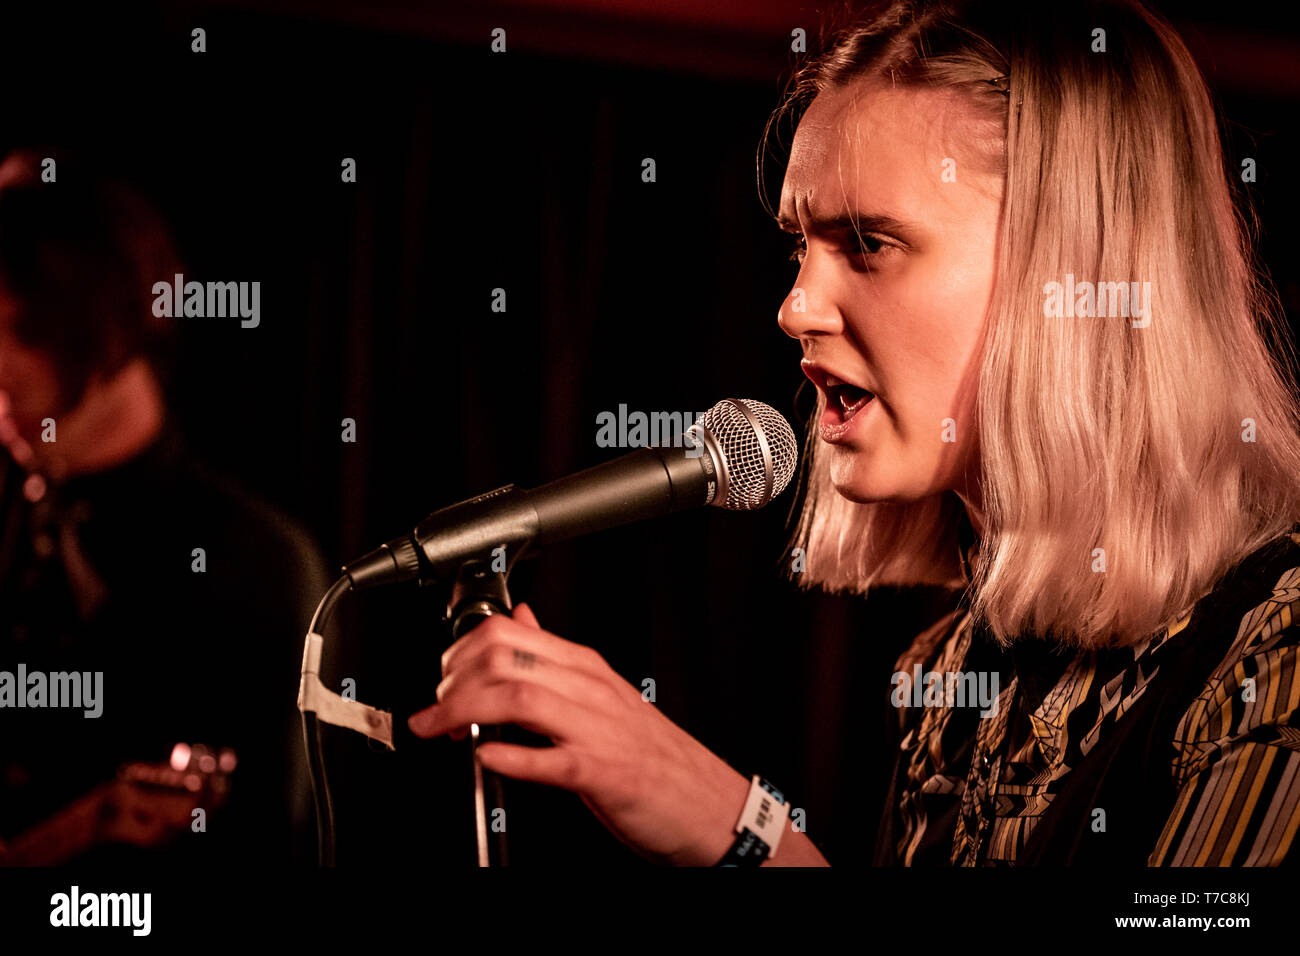 Denmark, Aarhus - May 3, 2019. The Swedish band Beverly Kills performs a live concert during the Danish music and showcase festival Spot Festival 2019 in Aarhus. Here singer Alma Westerlund is seen live on stage. (Photo credit: Gonzales Photo - Kim M. Leland). Stock Photo